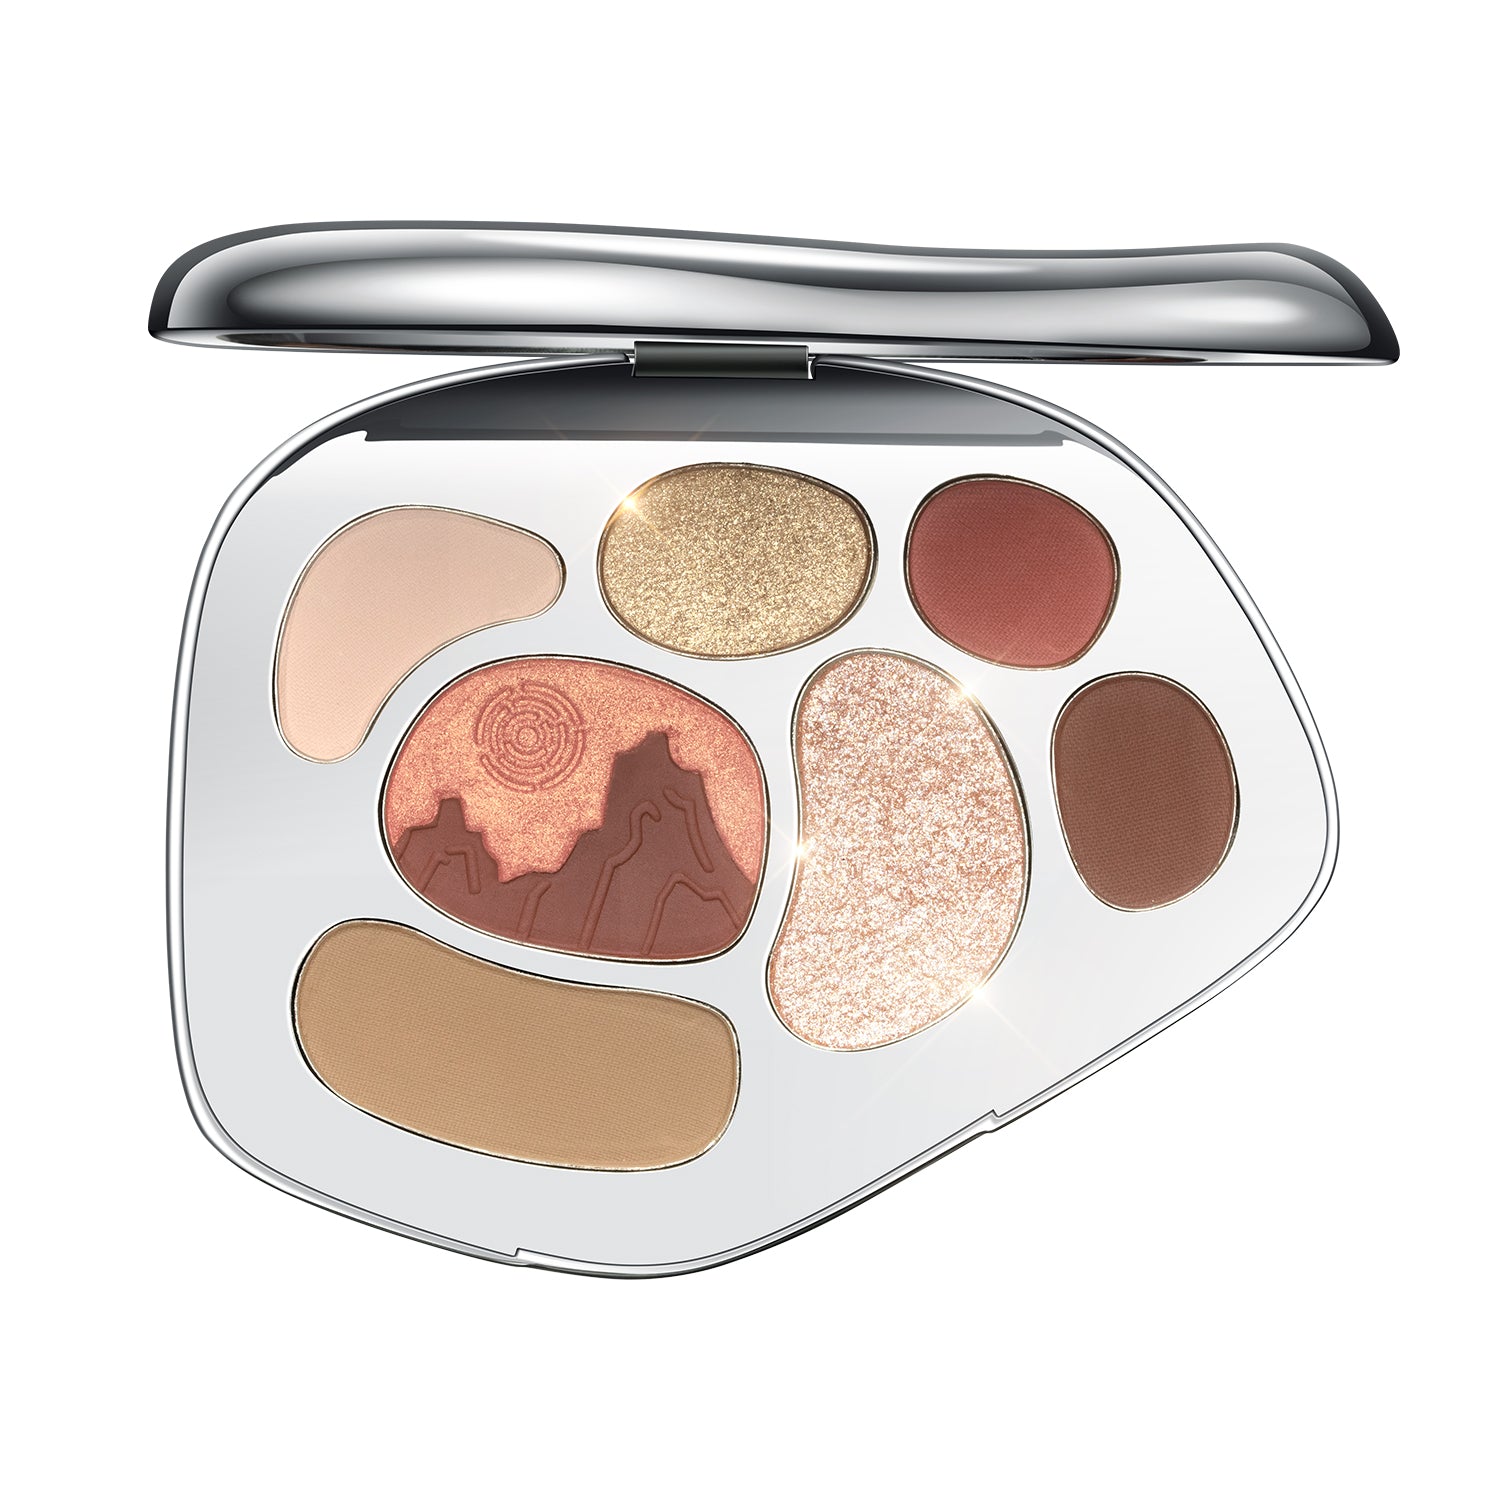 CATKIN Fairy Tales 4-in-1 Multi-function Makeup Palette C01 Eyeshadow Highlighter Blush Bronzer Full Face Makeup Palette